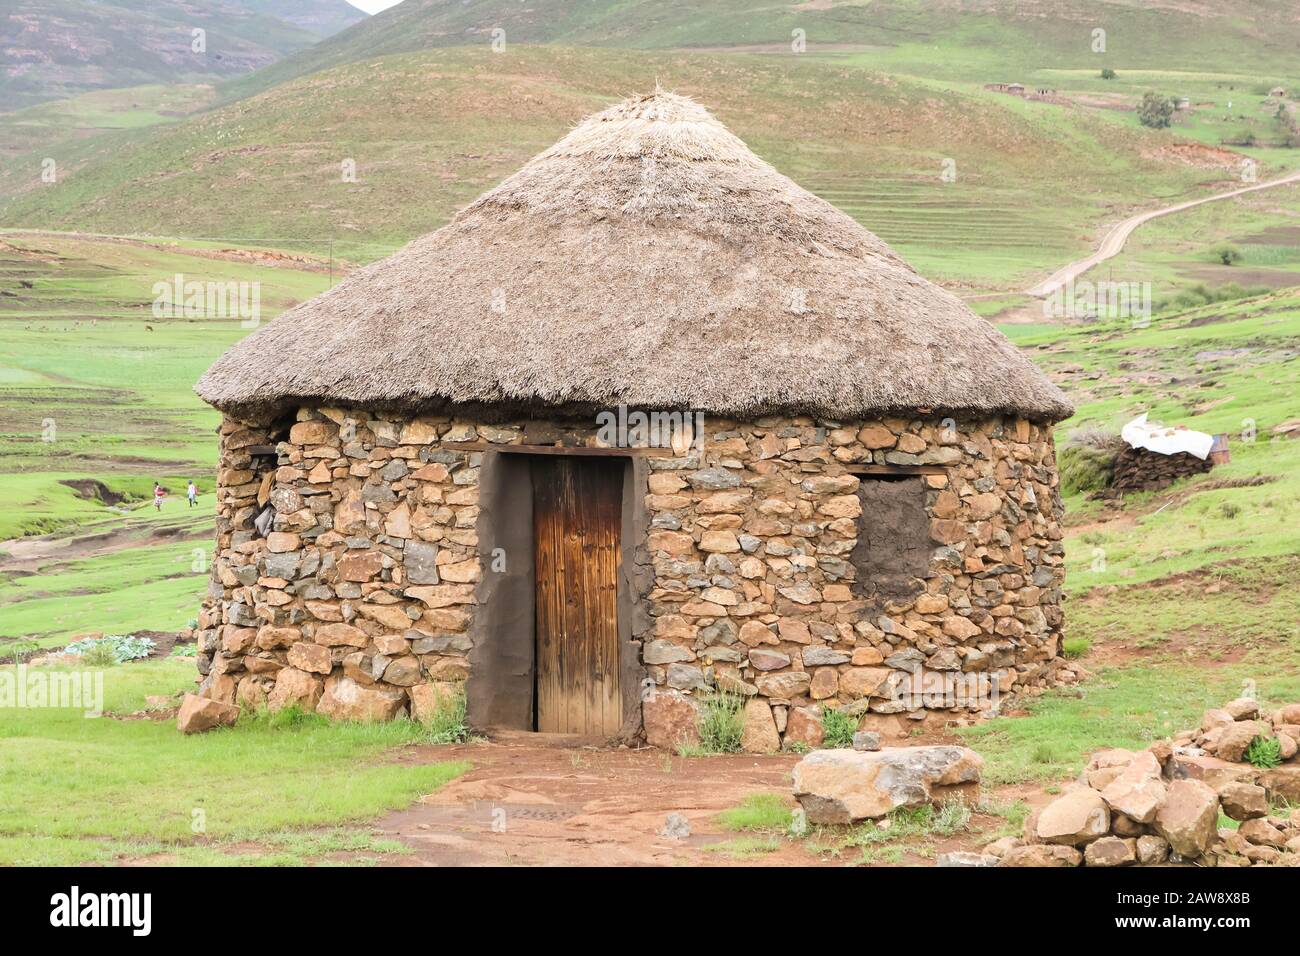 traditional stone bungalow with straw roof without people Stock Photo